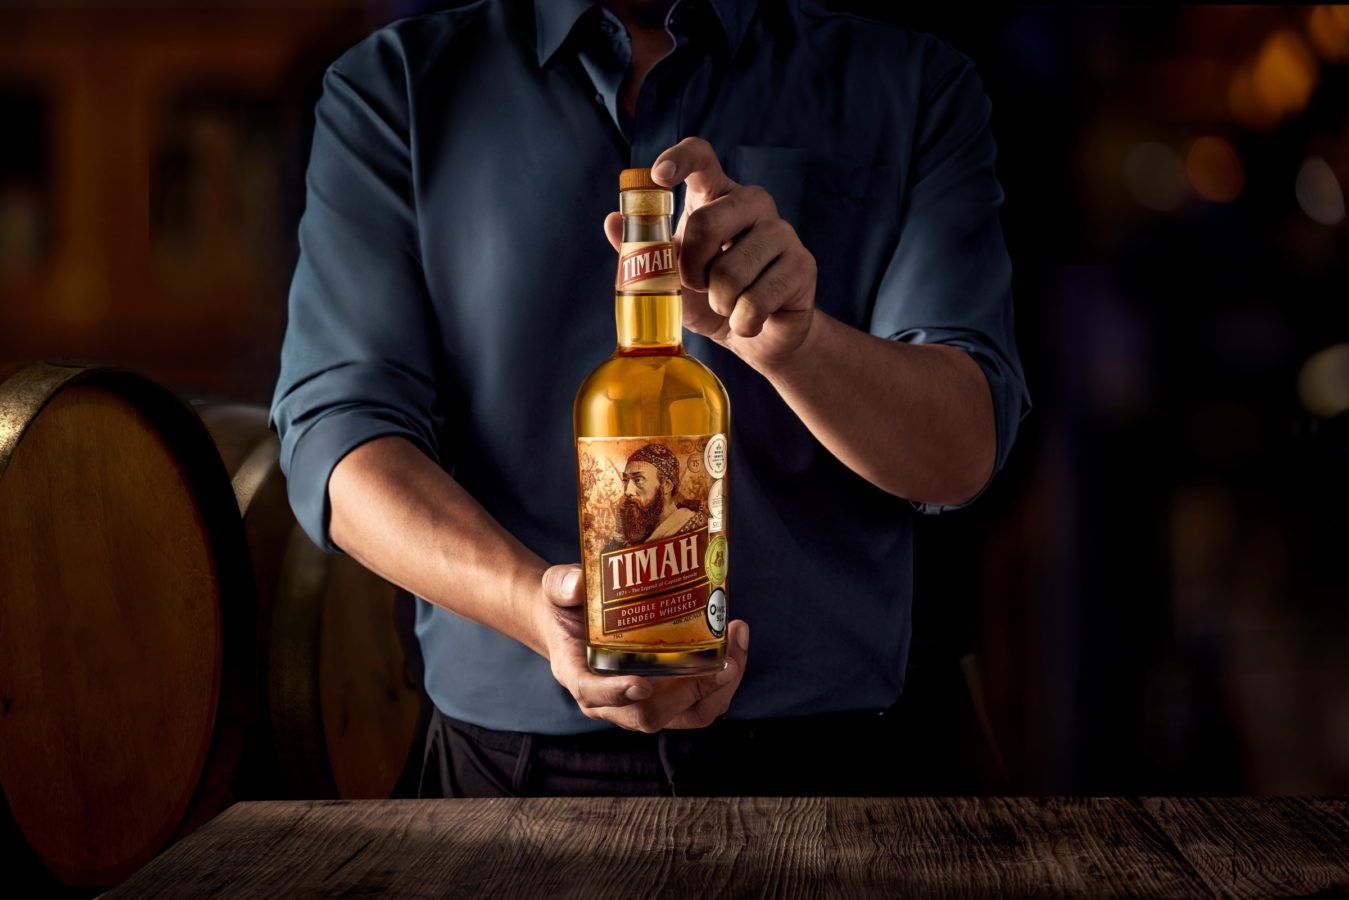 Move over Scotland — Malaysia has its own award-winning whiskey called Timah